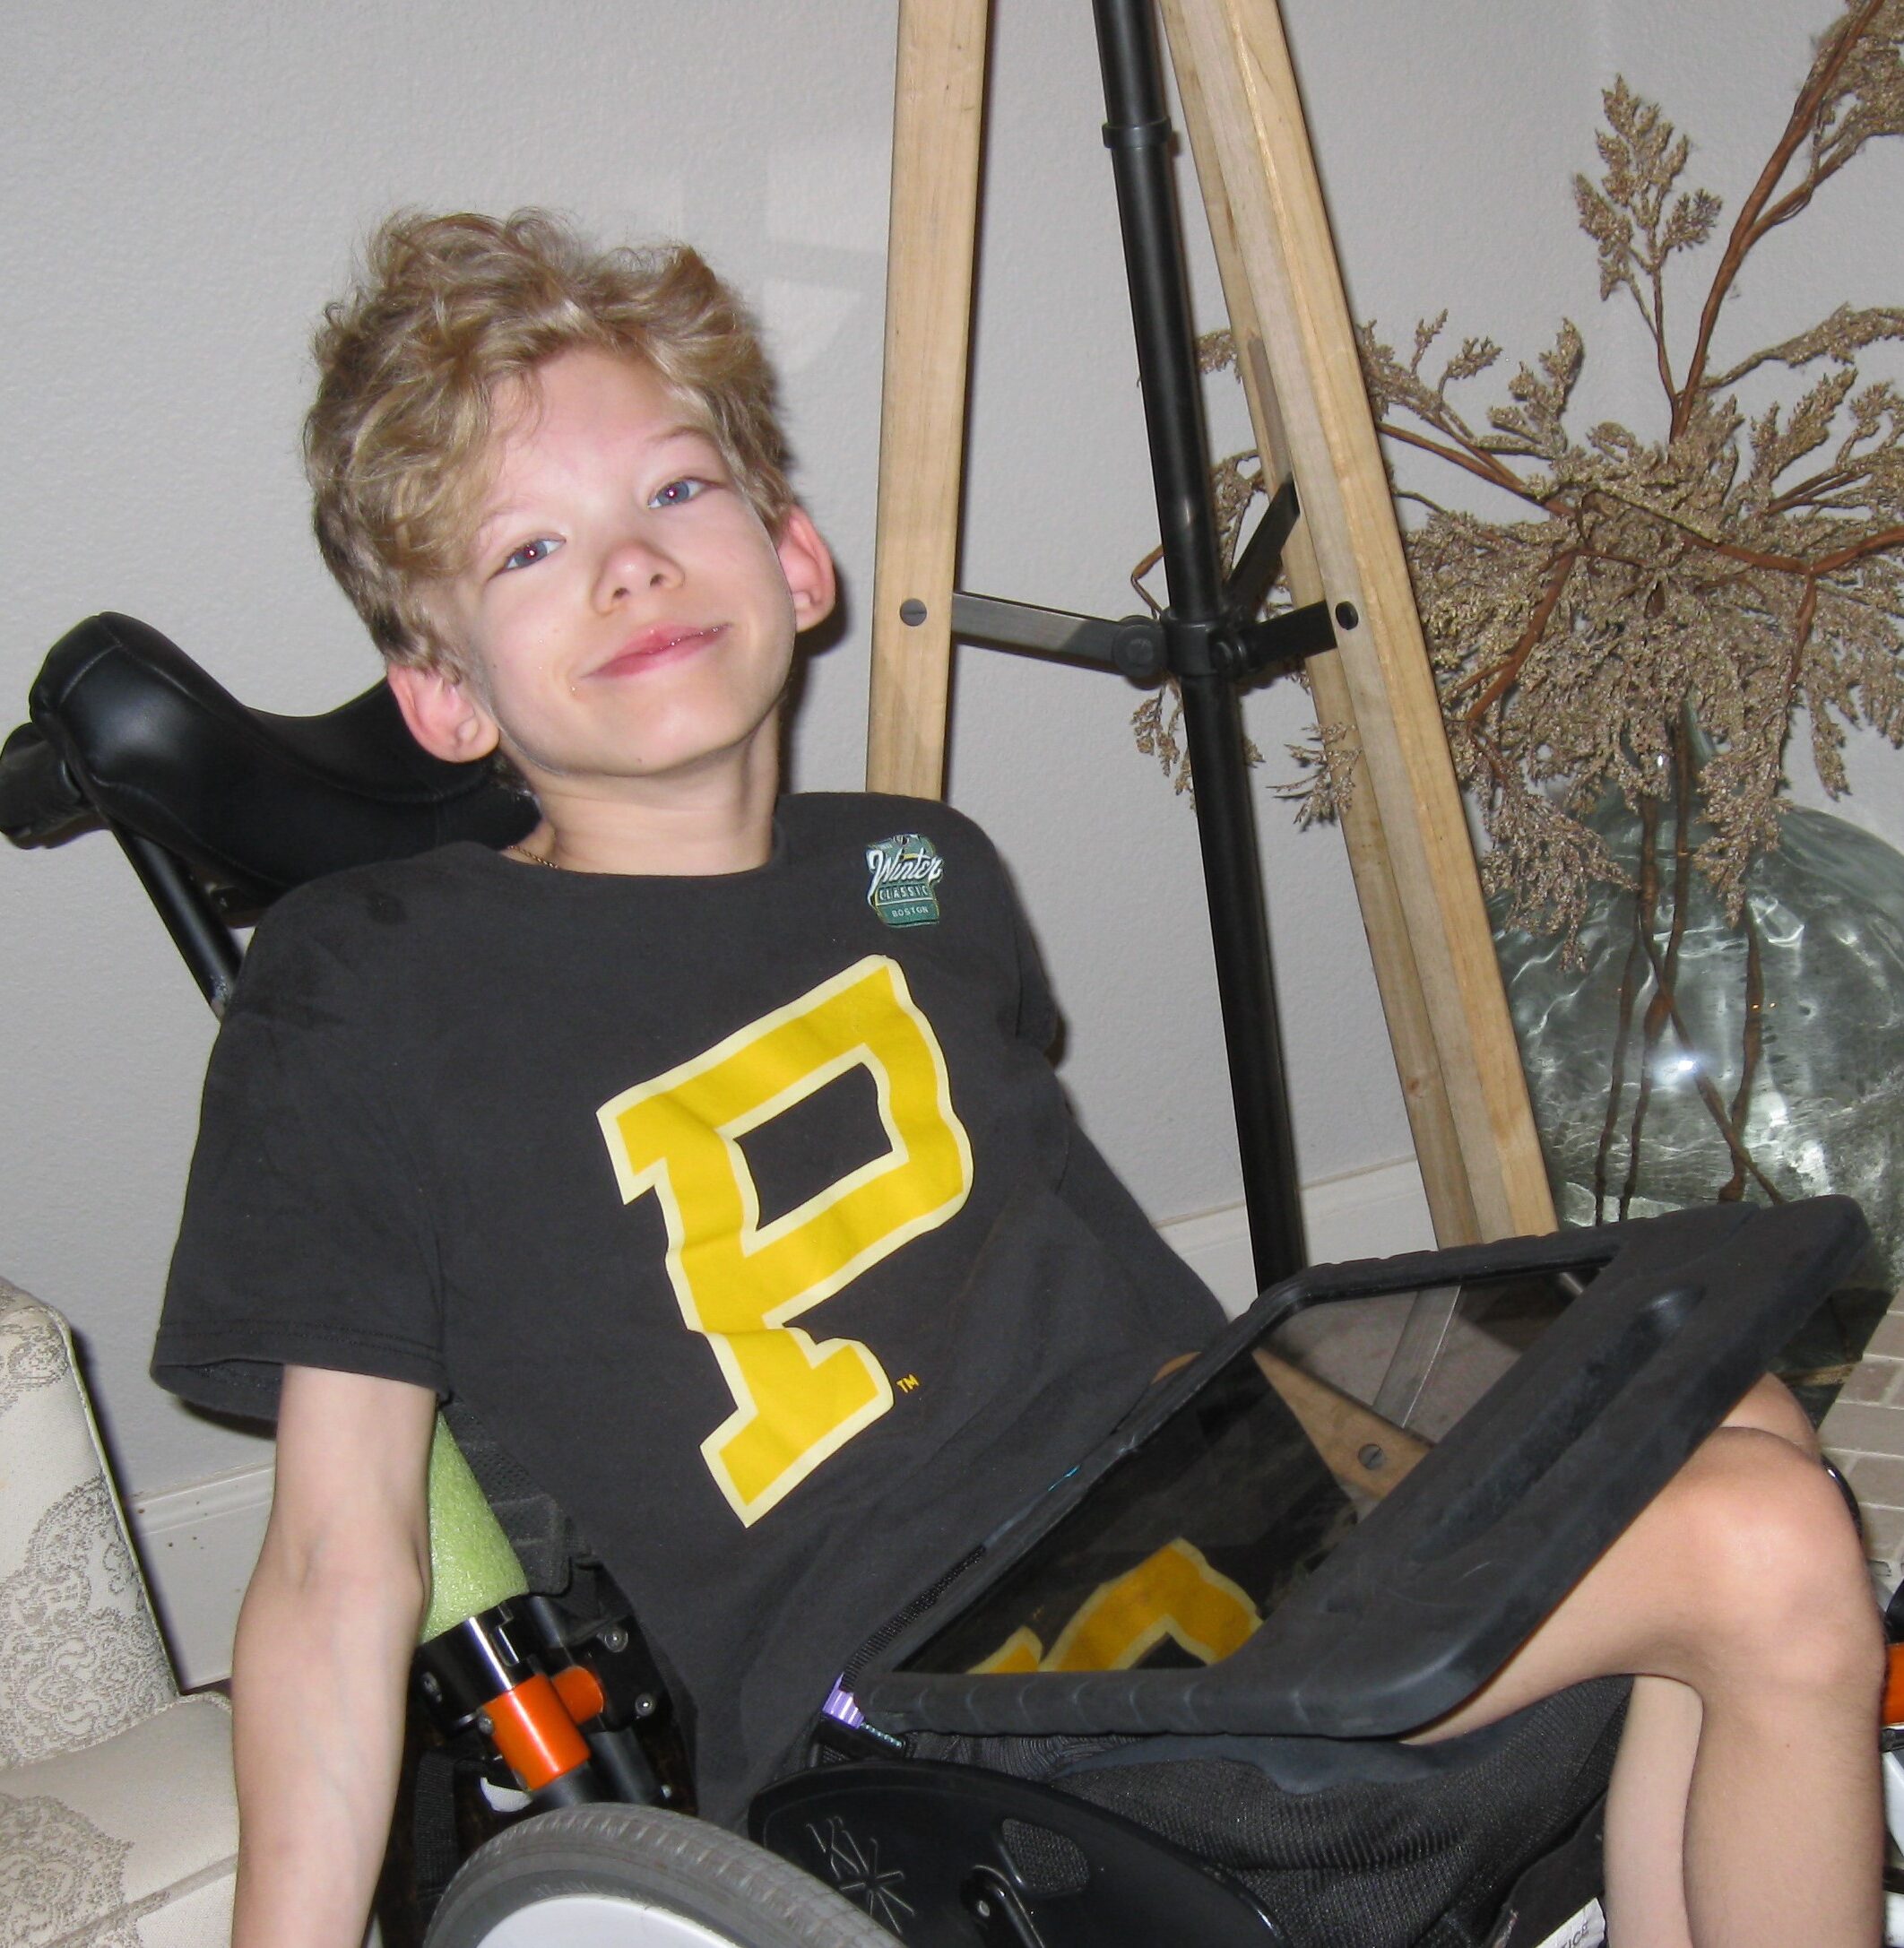 A boy in a wheelchair with a bag on his back.